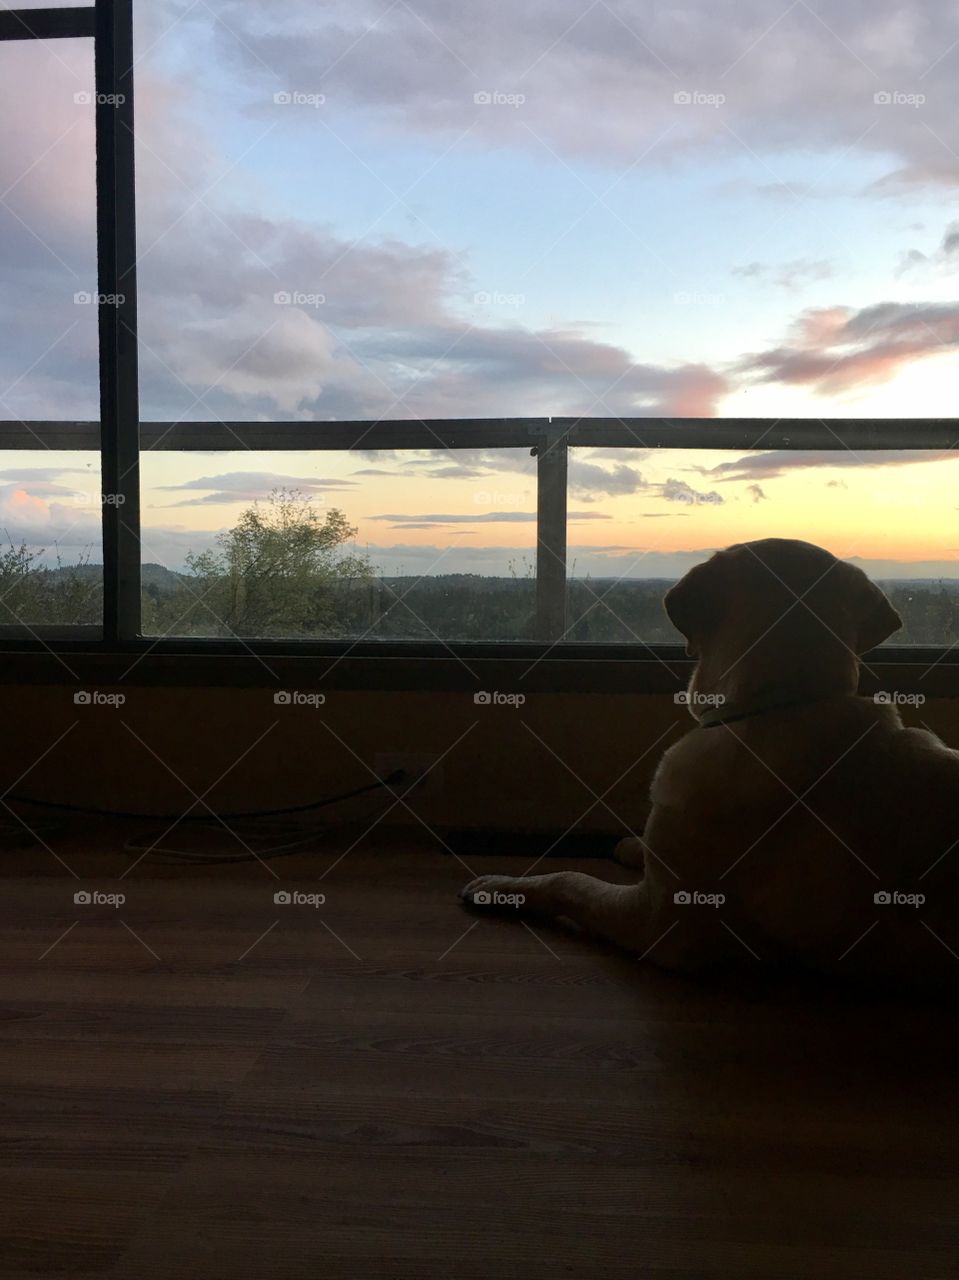 Yellow Labrador thinking about life while watching sunset. 